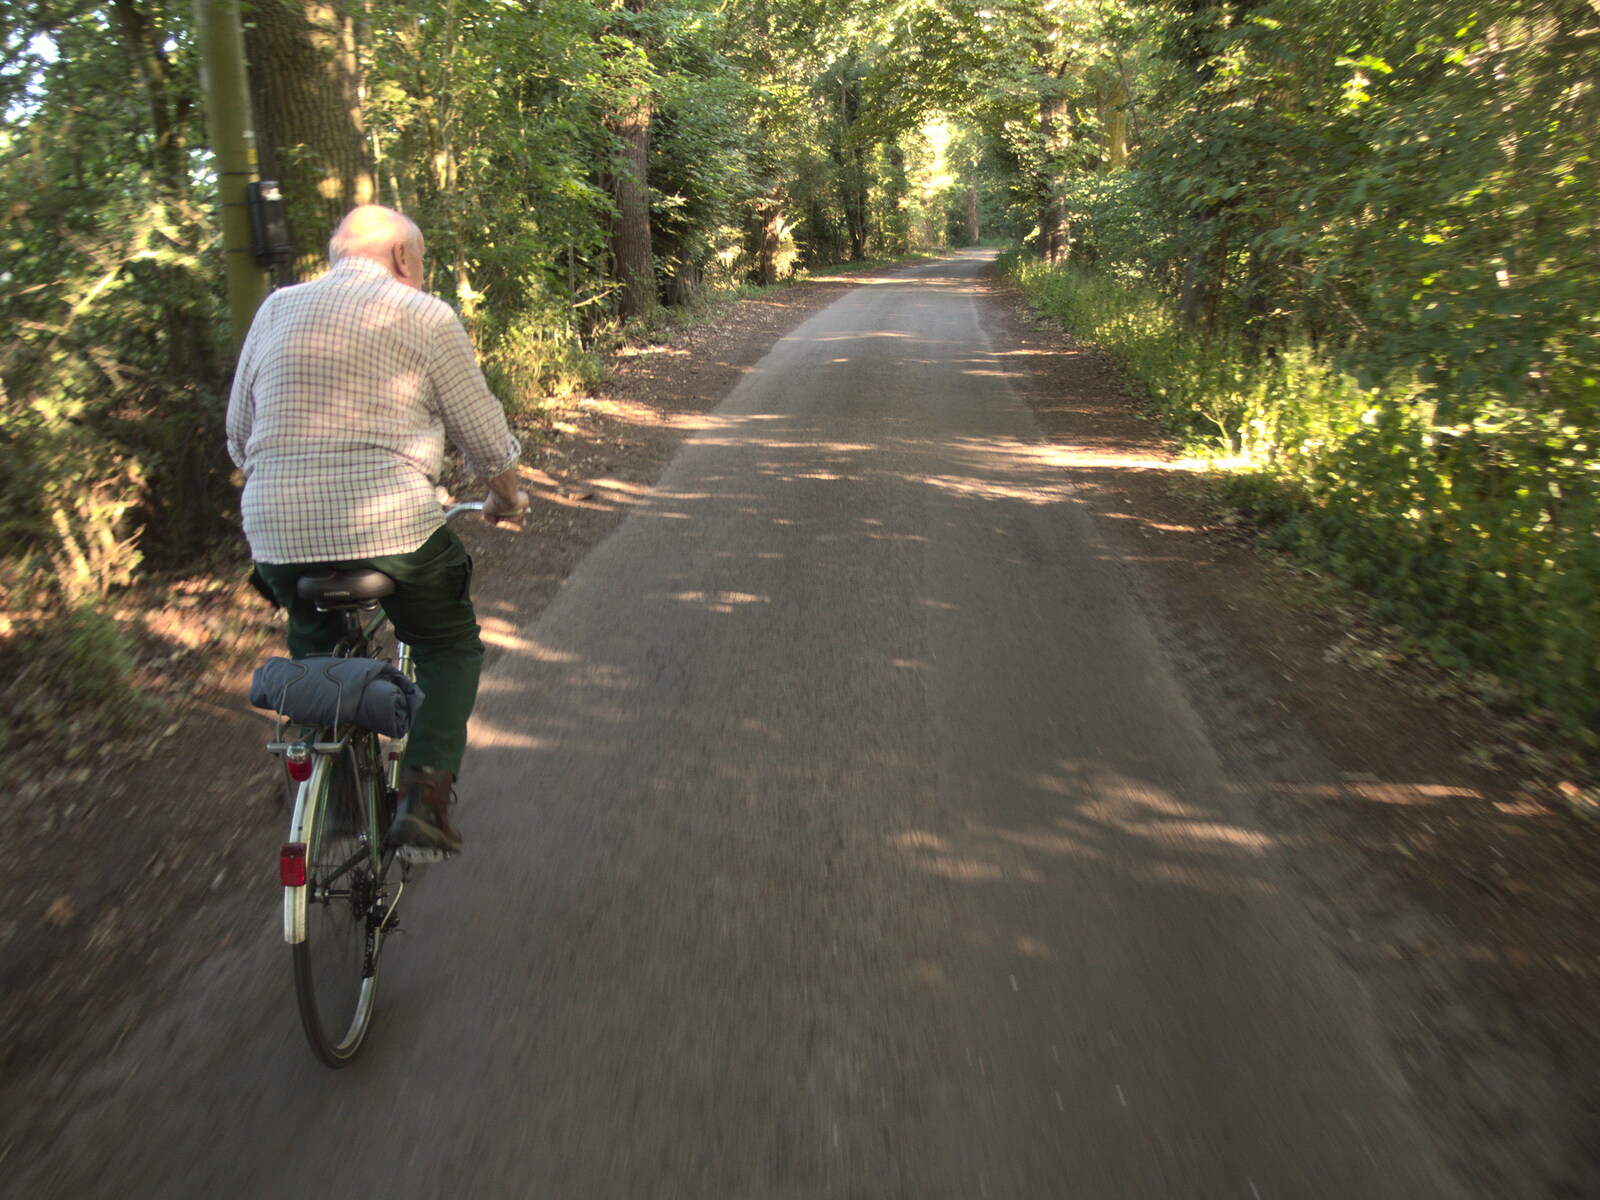 Mick the Brick cycles through Thornham Woods from Pizza at the Village Hall, Brome, Suffolk - 24th June 2022